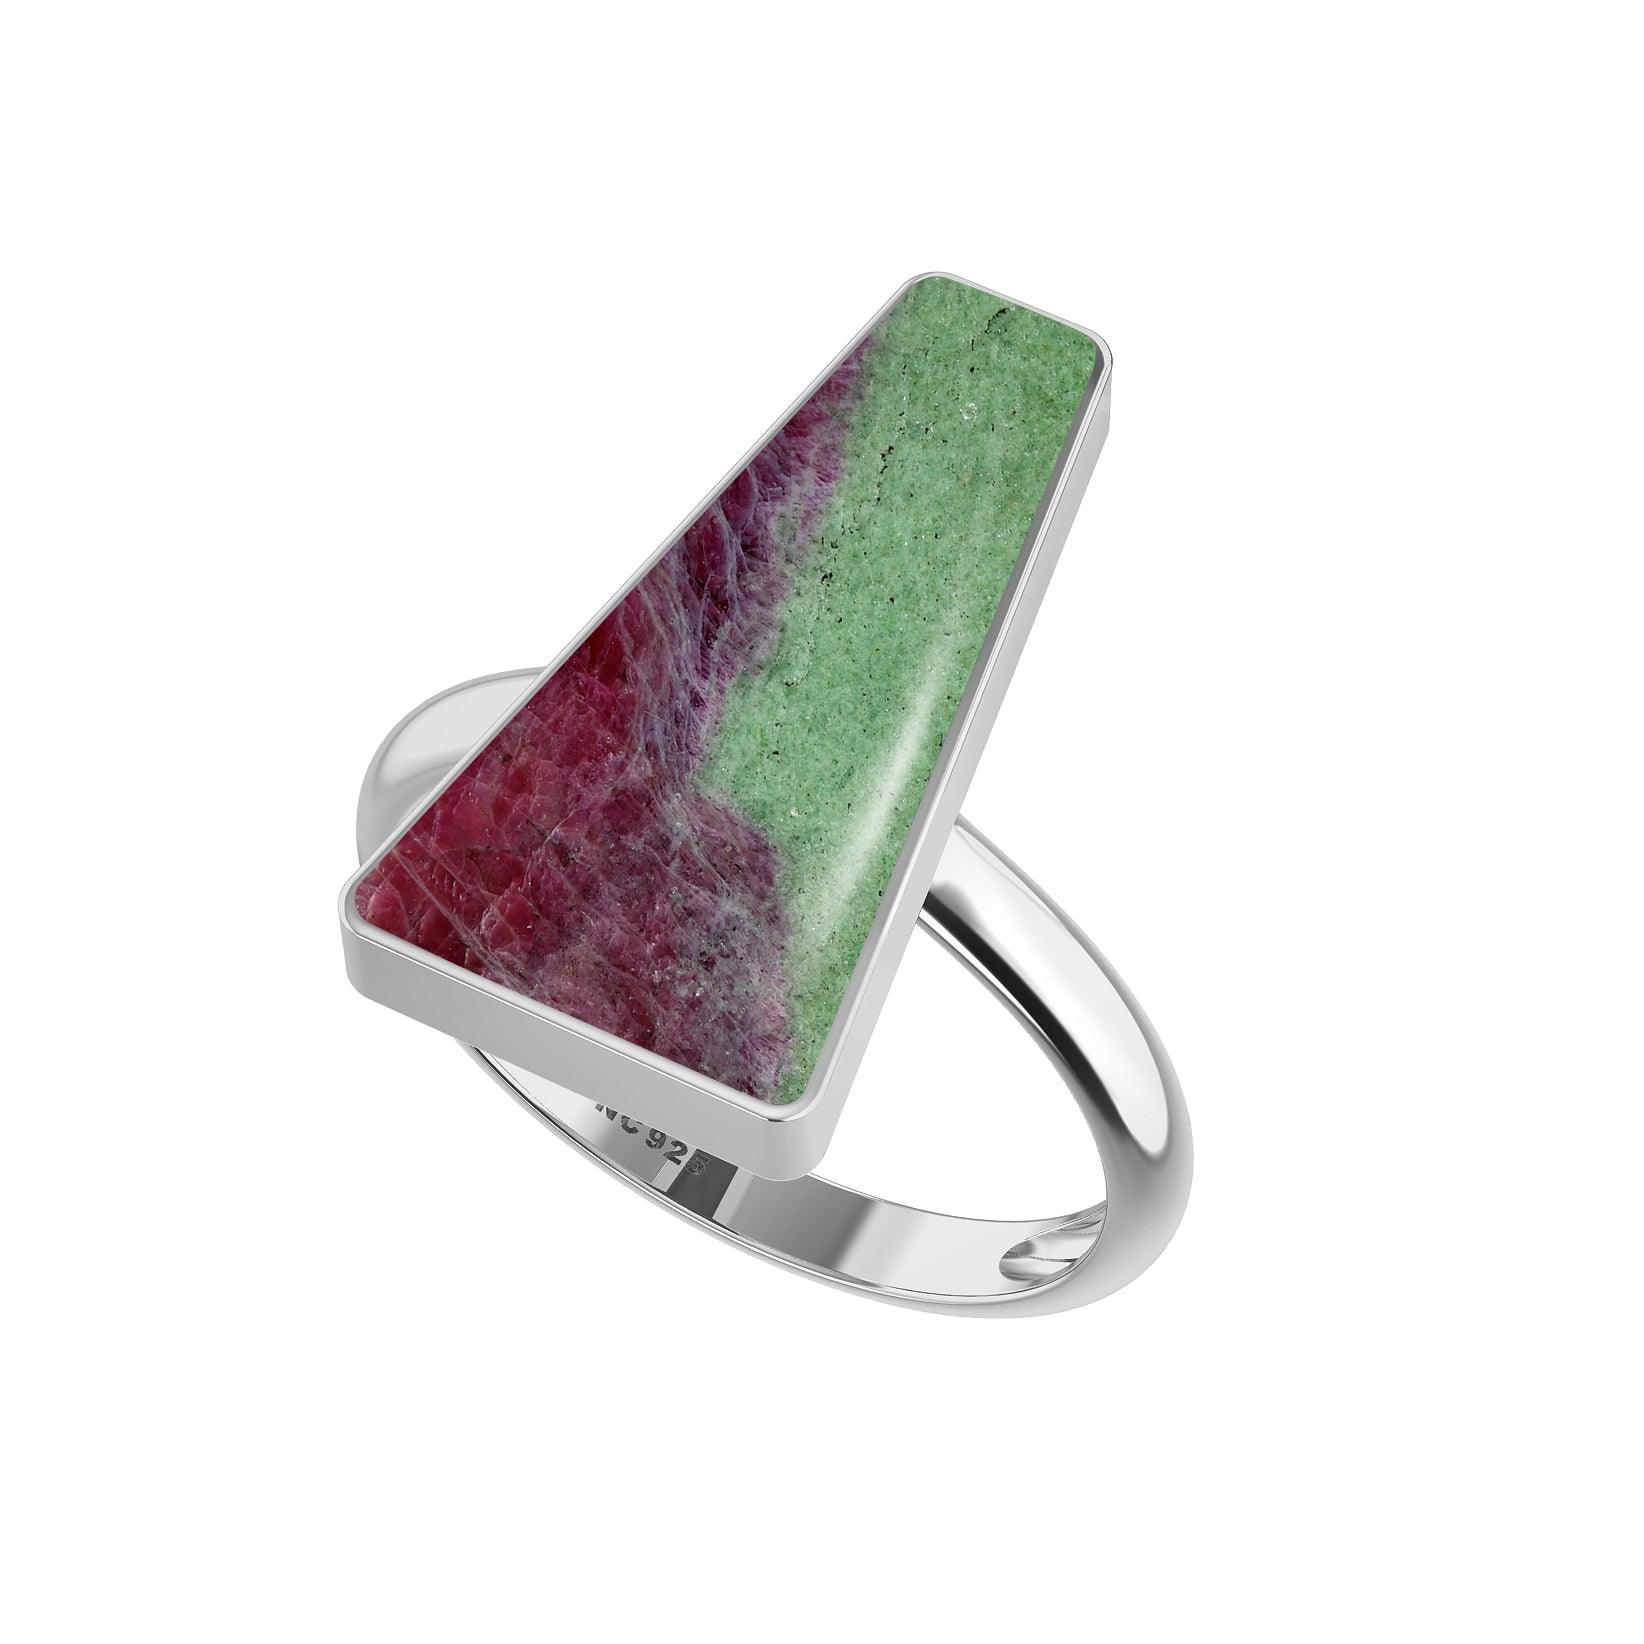 Natural Ruby Zoisite Ring 925 Sterling Silver Bezel Set Handmade Jewelry Pack of 6 (Box 8)